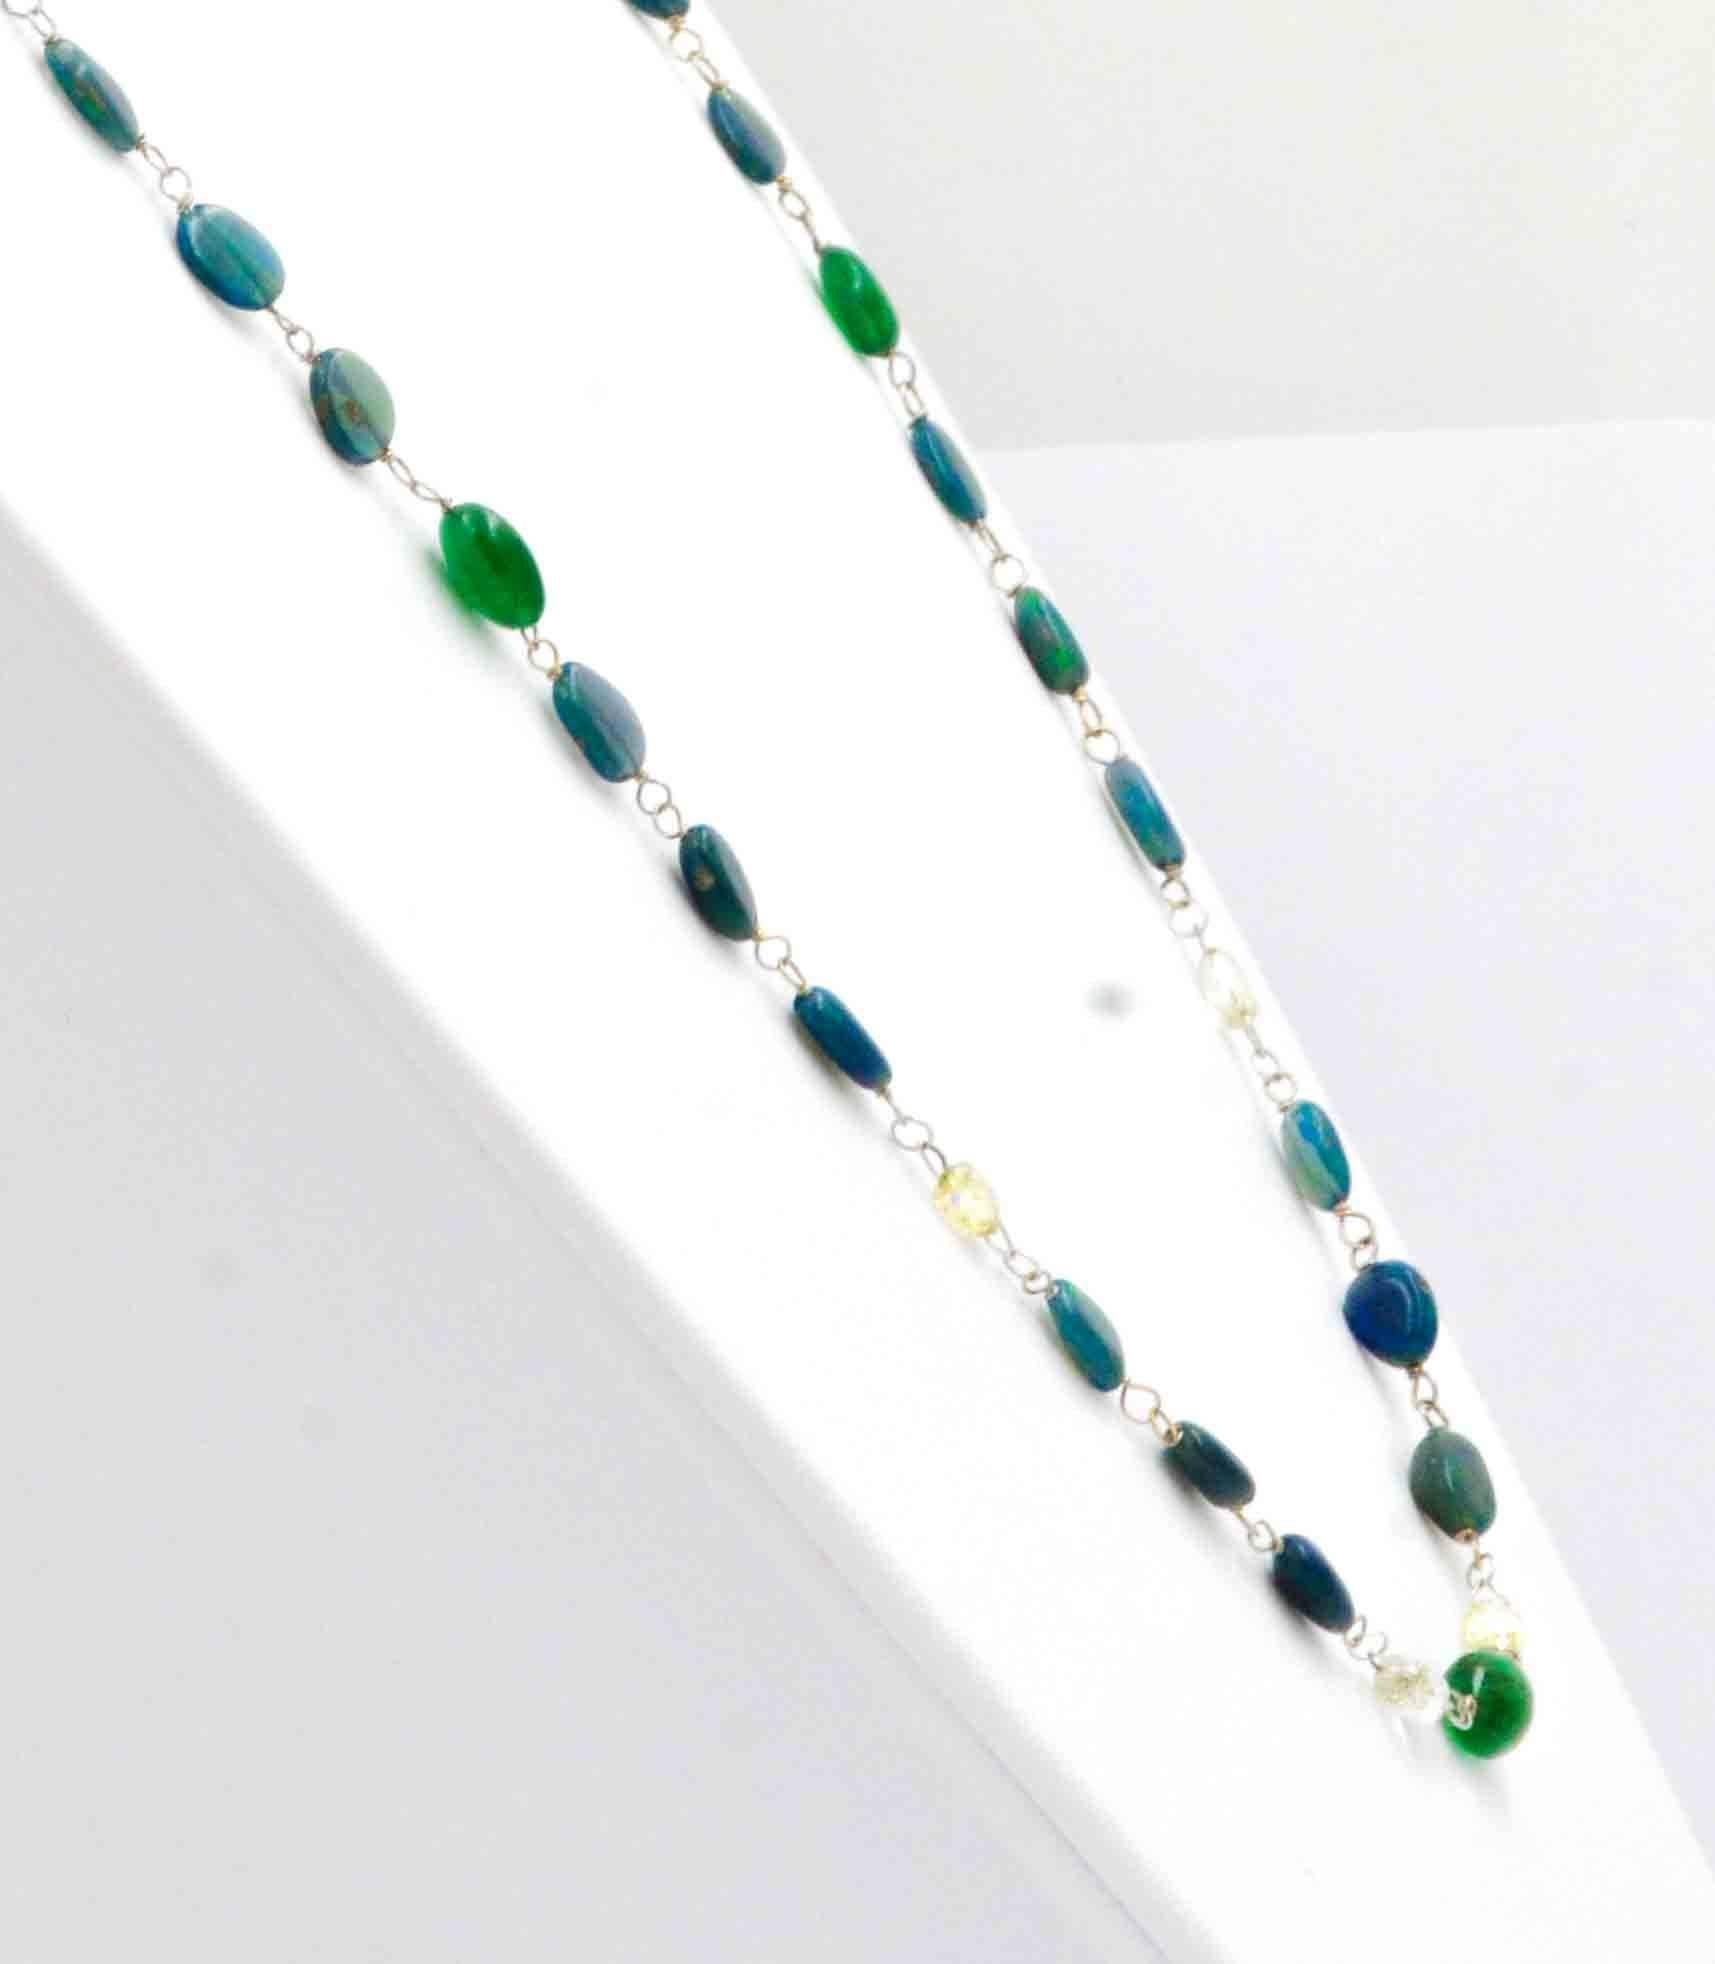 This attractive 18kt yellow gold necklace features beautiful green and blue crystal opal beads with amazing red and orange broad-flash colors.  These amazing crystal opals are contrasted with vivid green emerald beads.  The emerald and opal beads